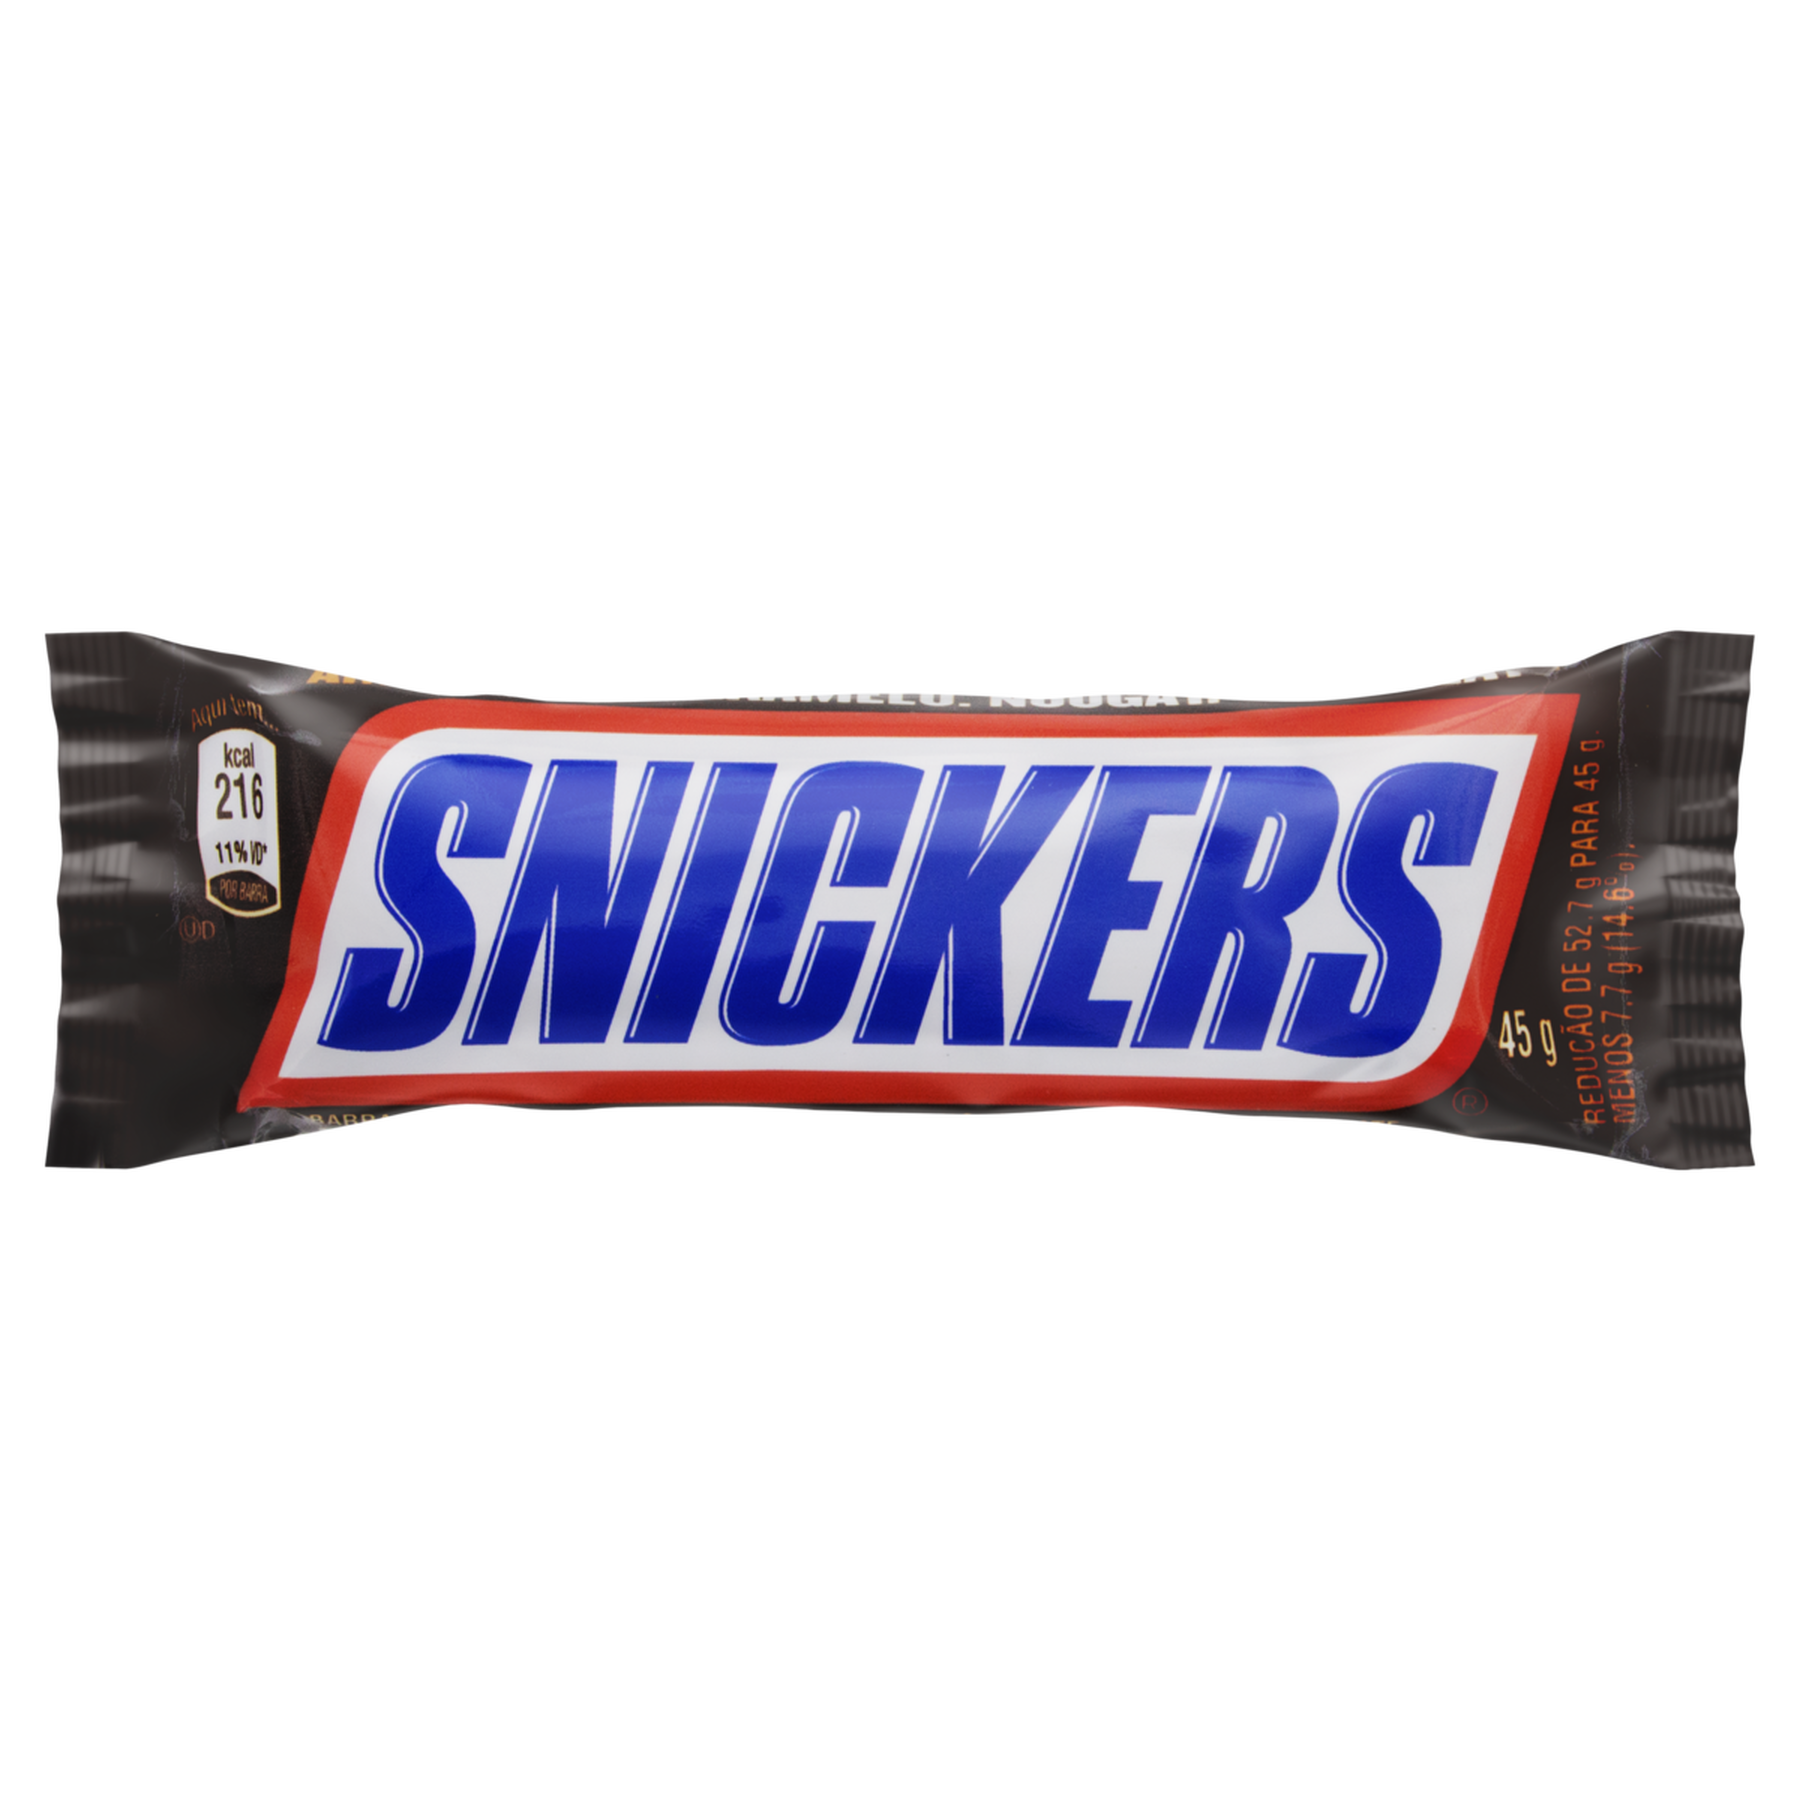 Bombom Snickers Pacote 45g